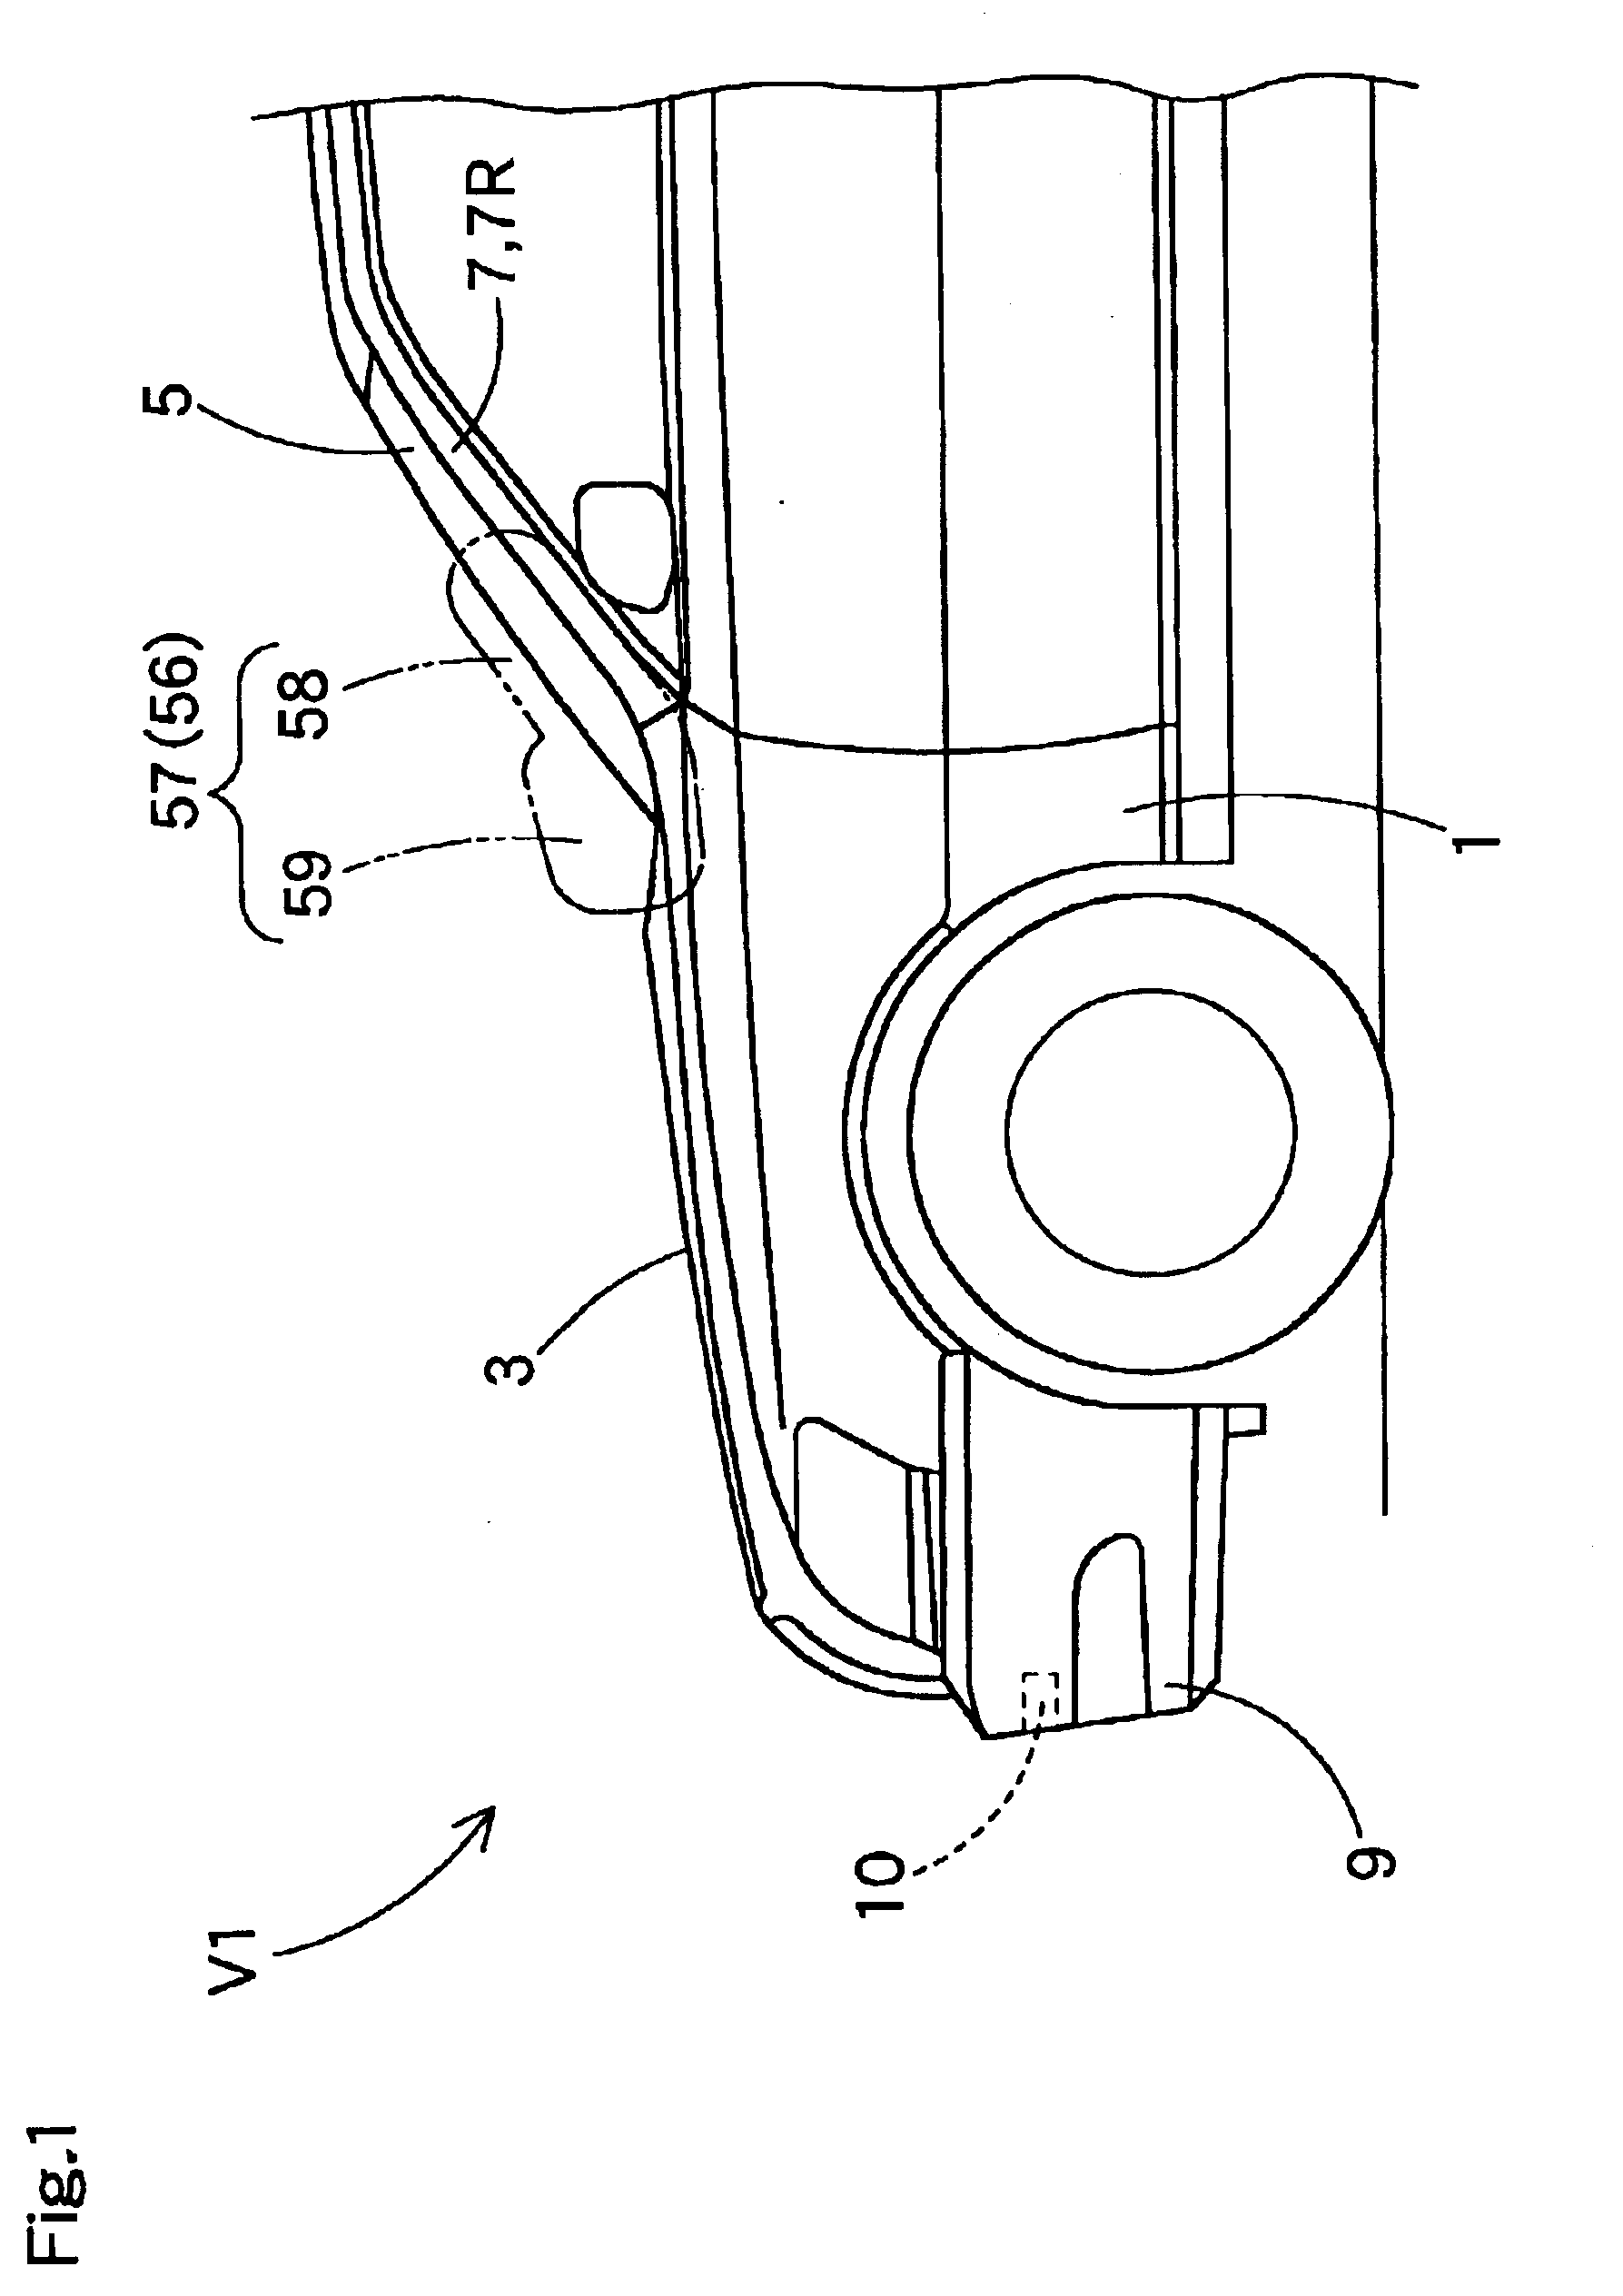 Pedestrian protecting device